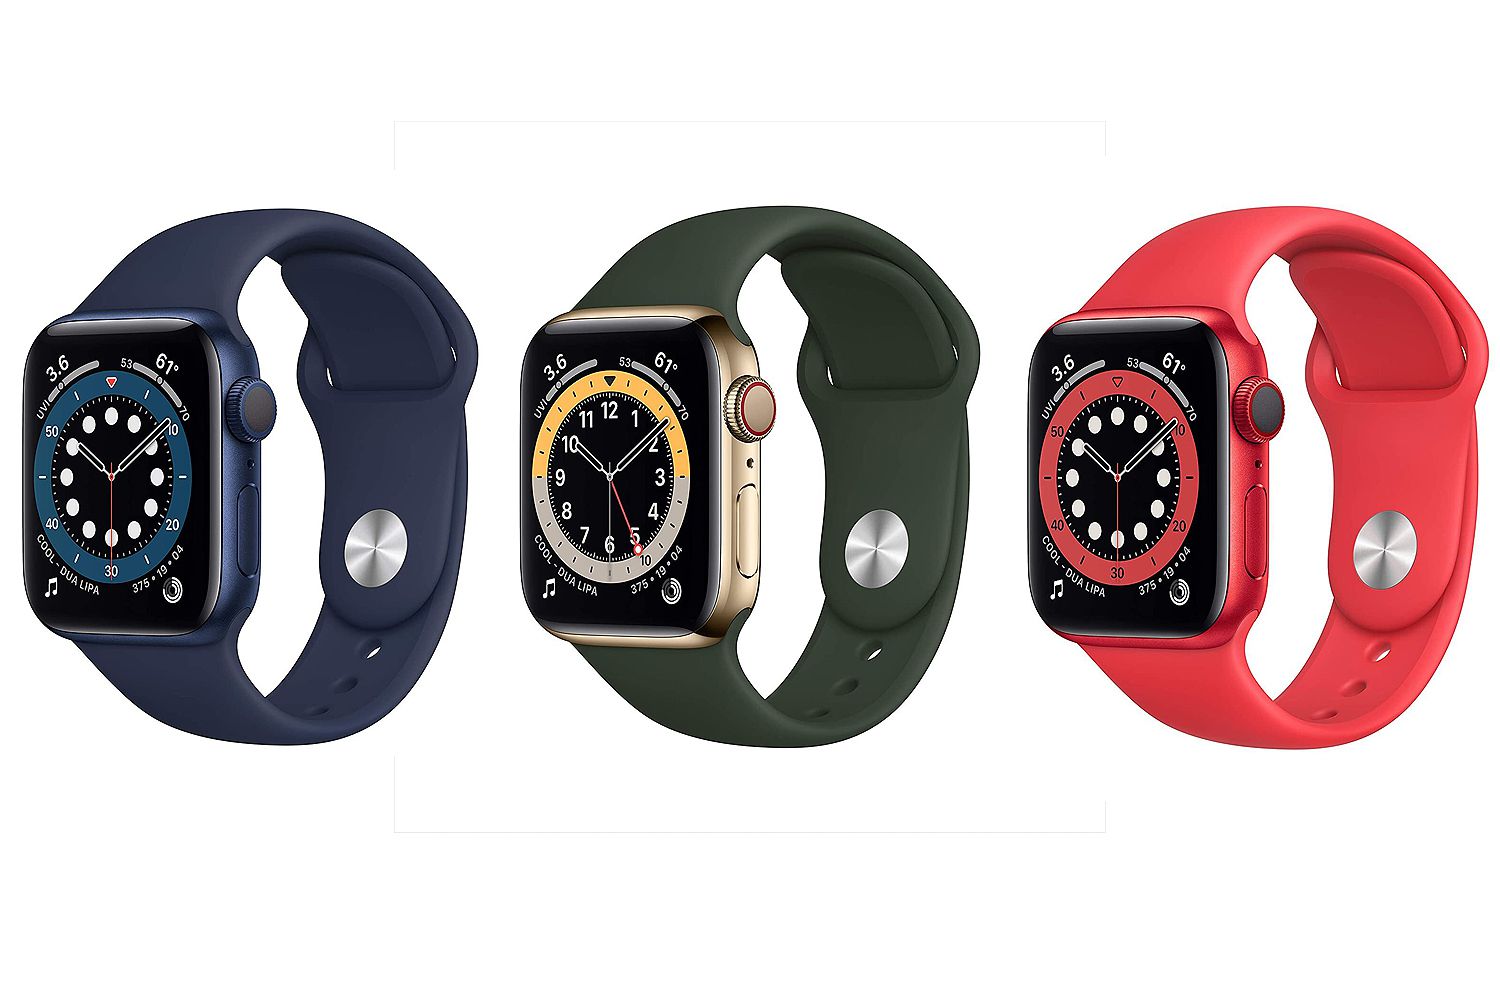 The Newest Apple Watches Are Both on Sale at Amazon This Weekend